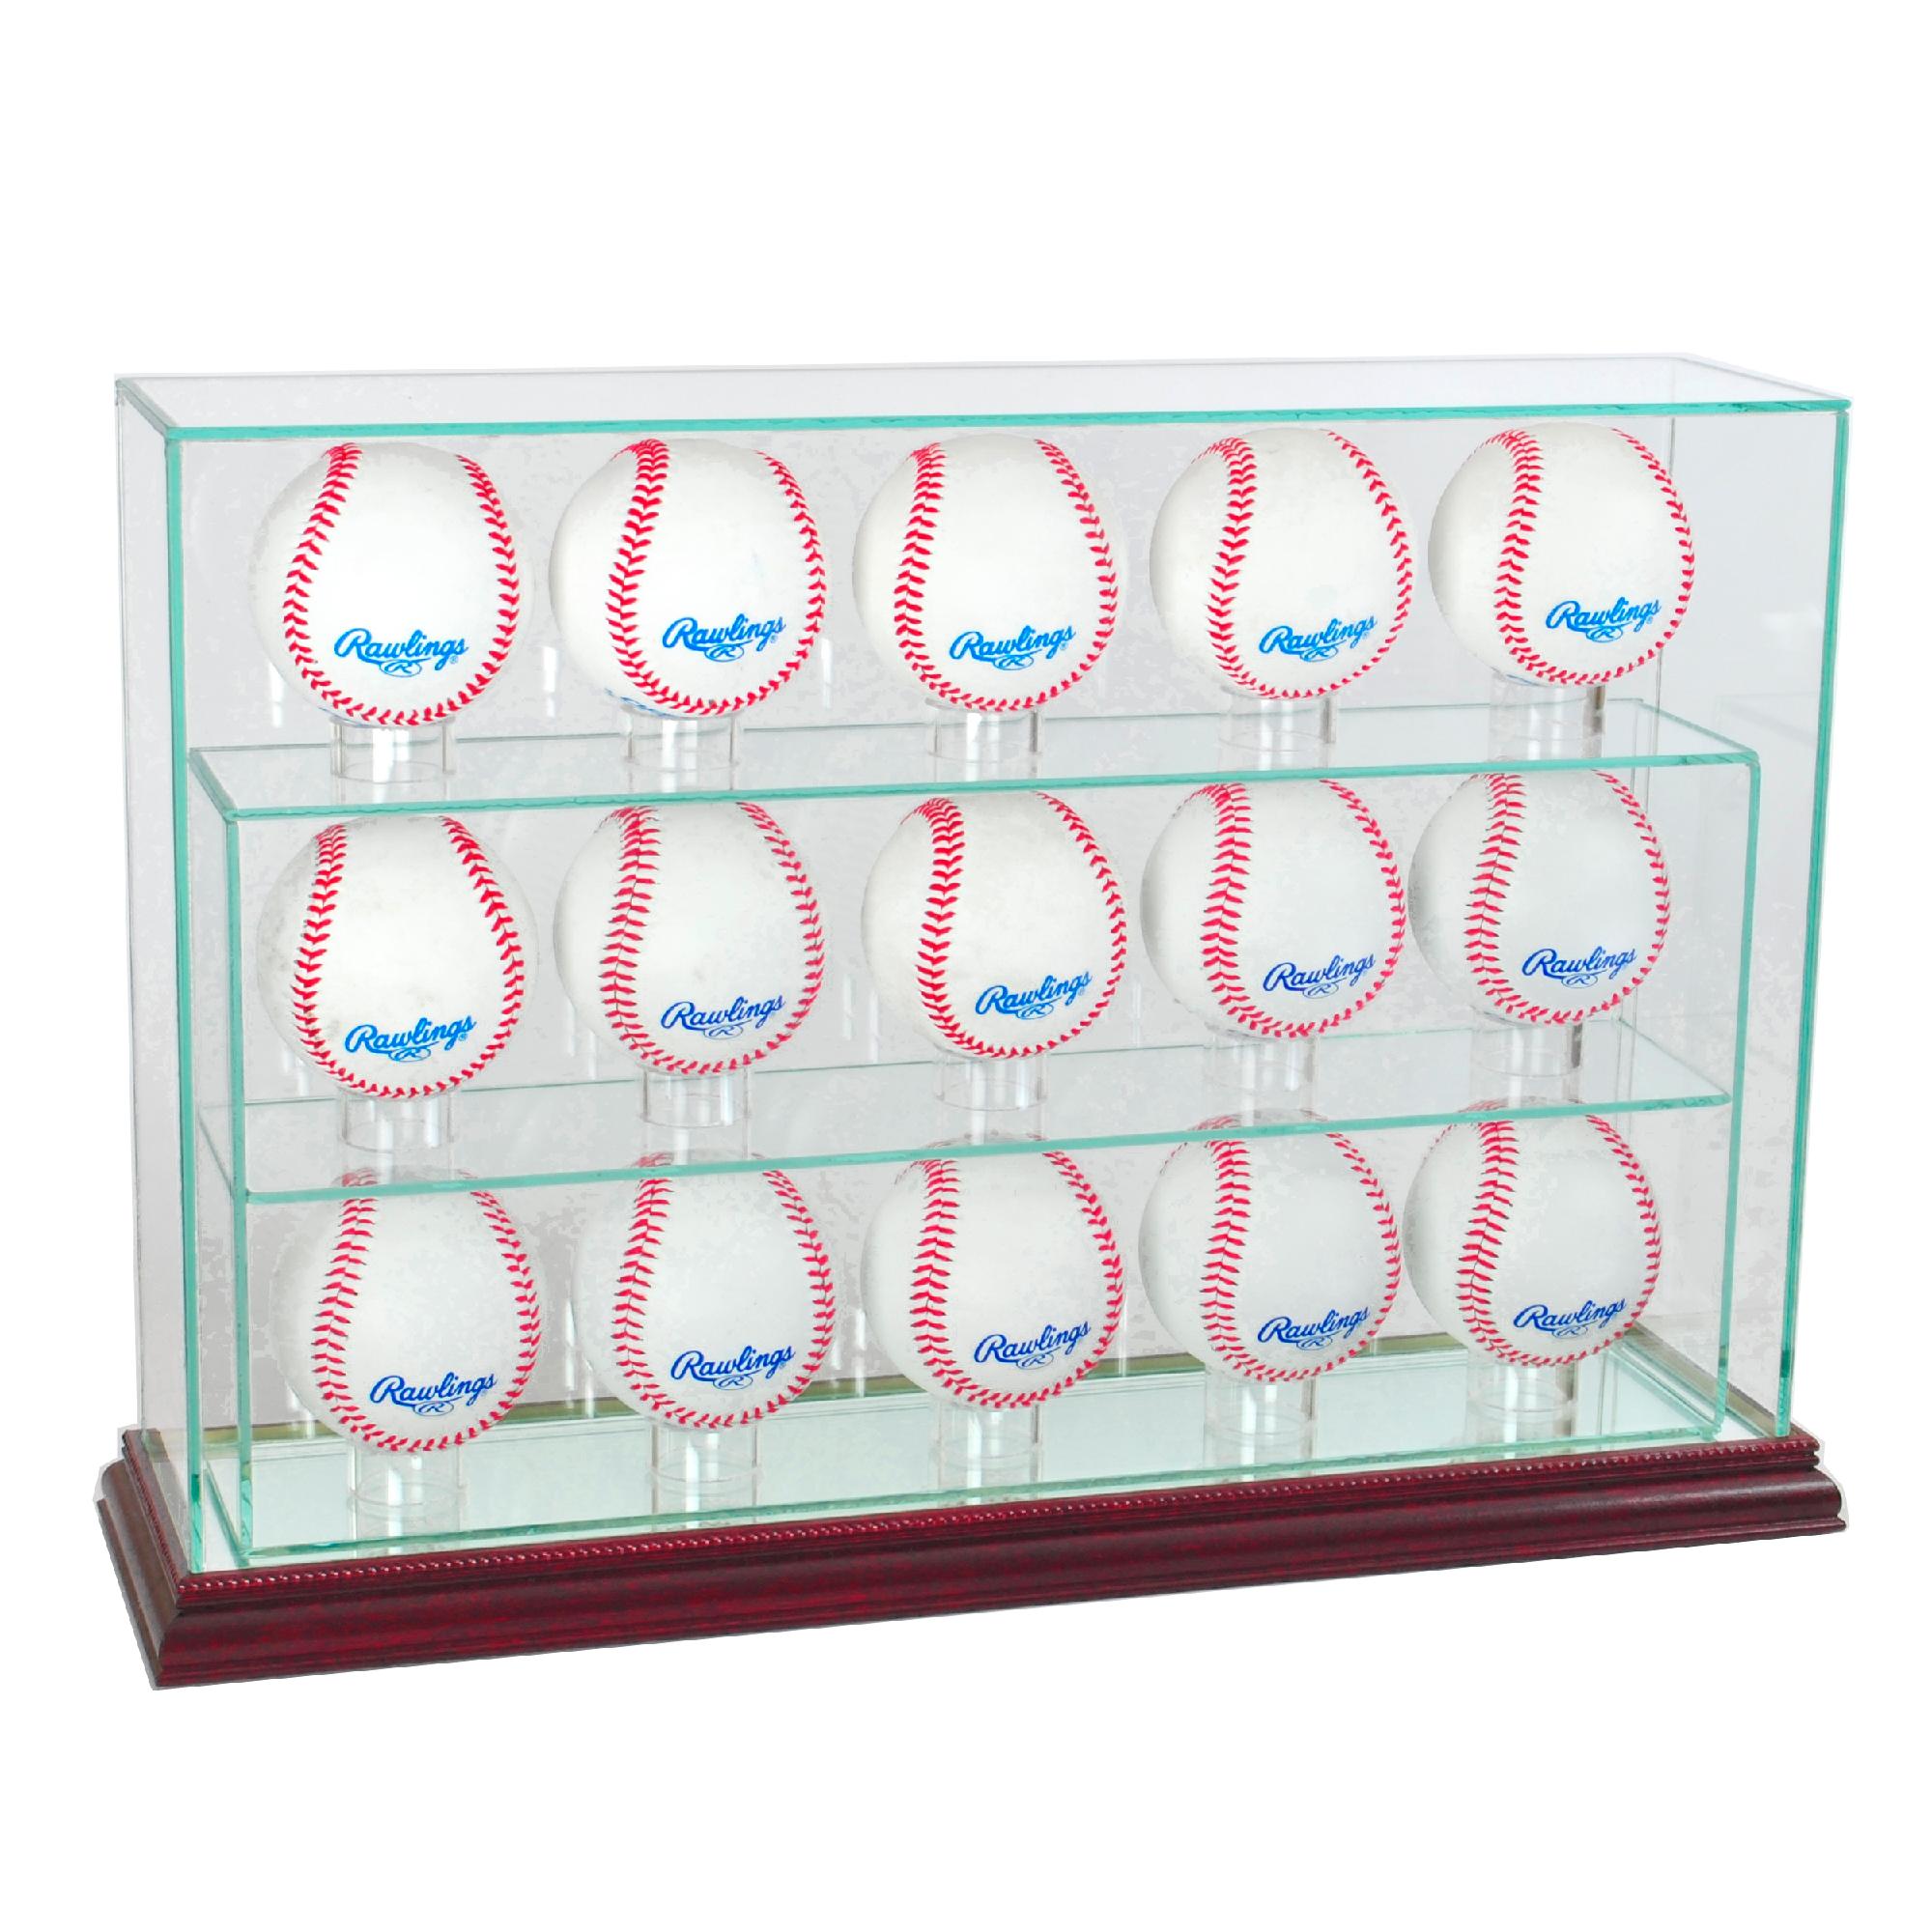 Perfect Cases 15 Baseball Upright Display Case with Cherry Finish